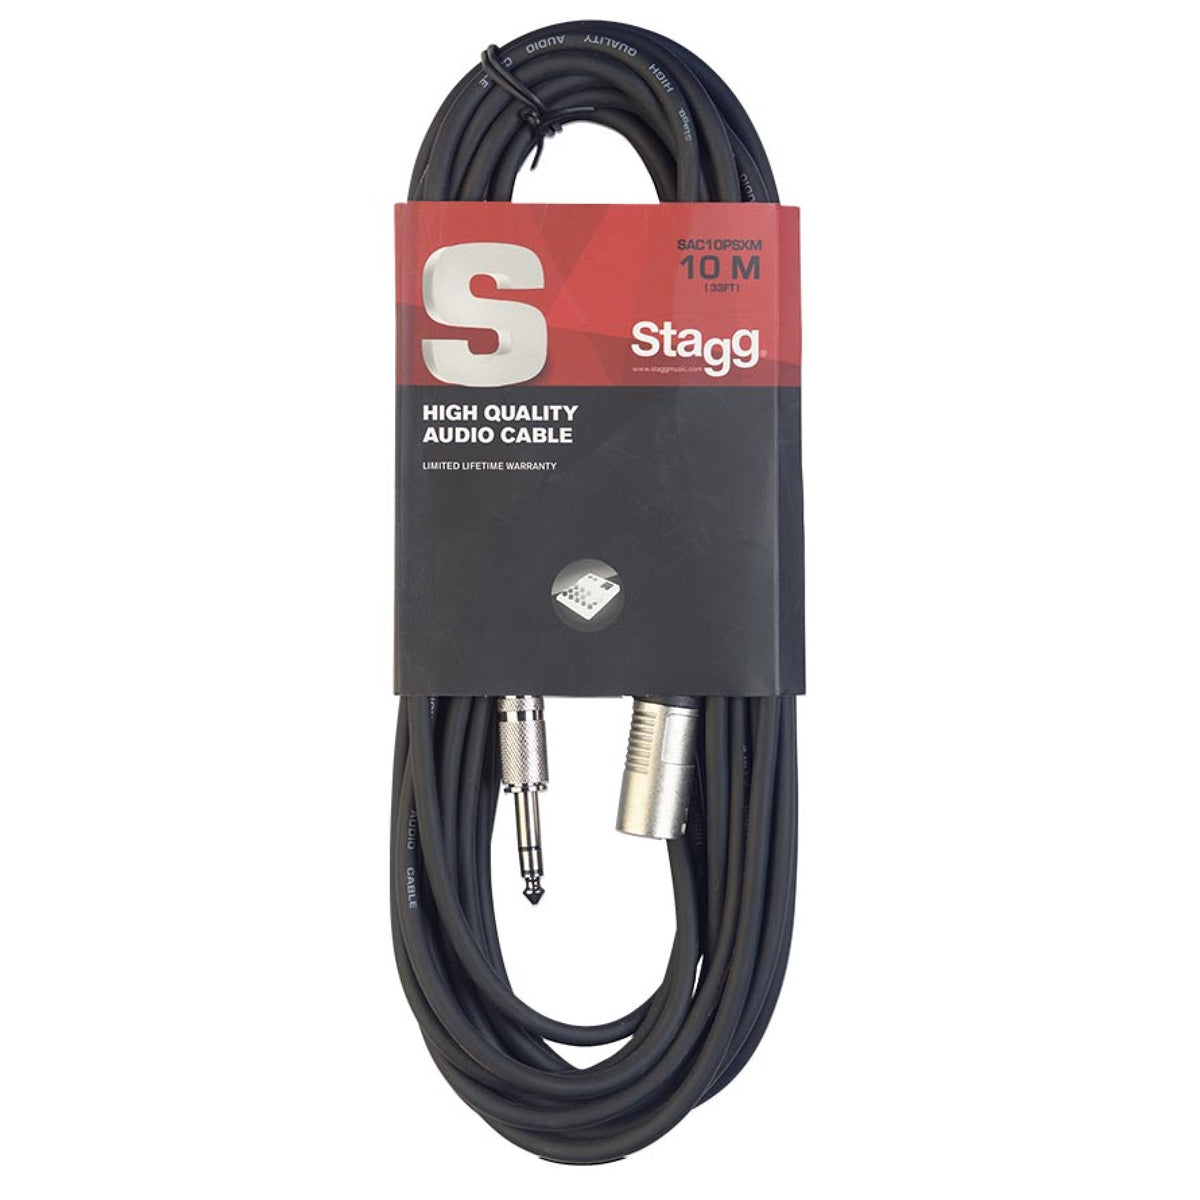 Stagg S-Series Audio Cable - Balanced 1/4" Stereo Jack Plug to Male XLR